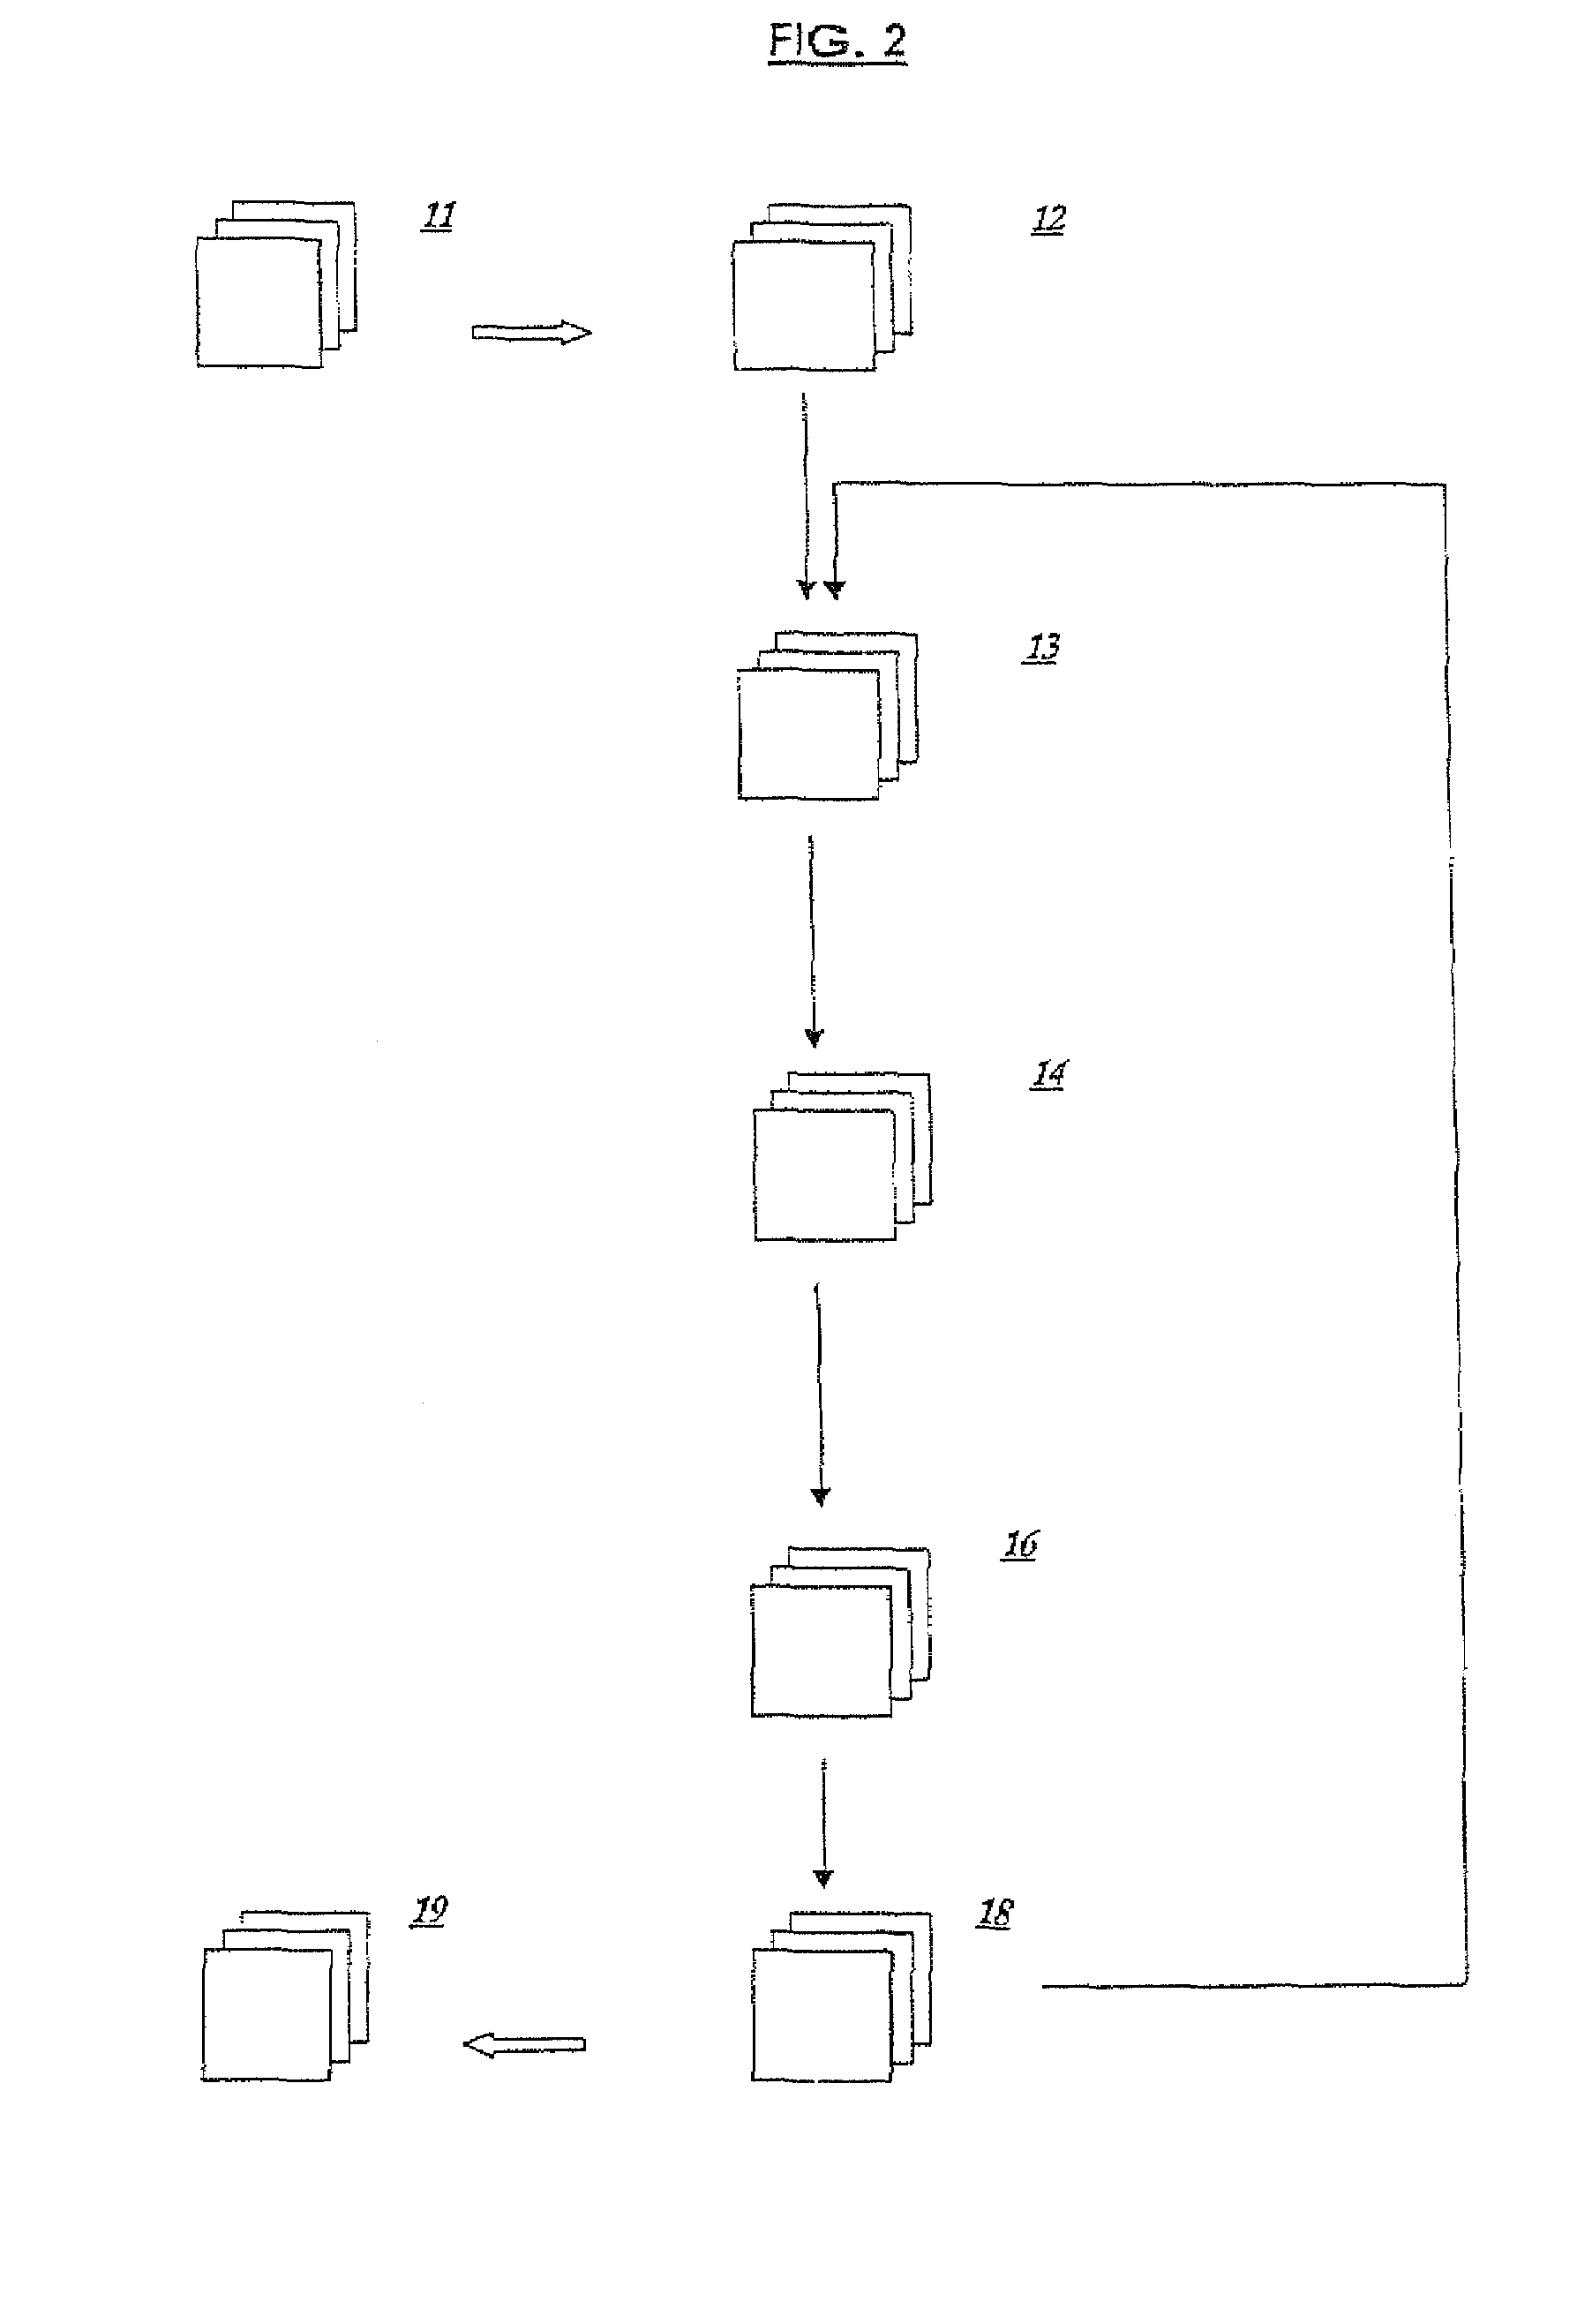 Method of testing an electronic system